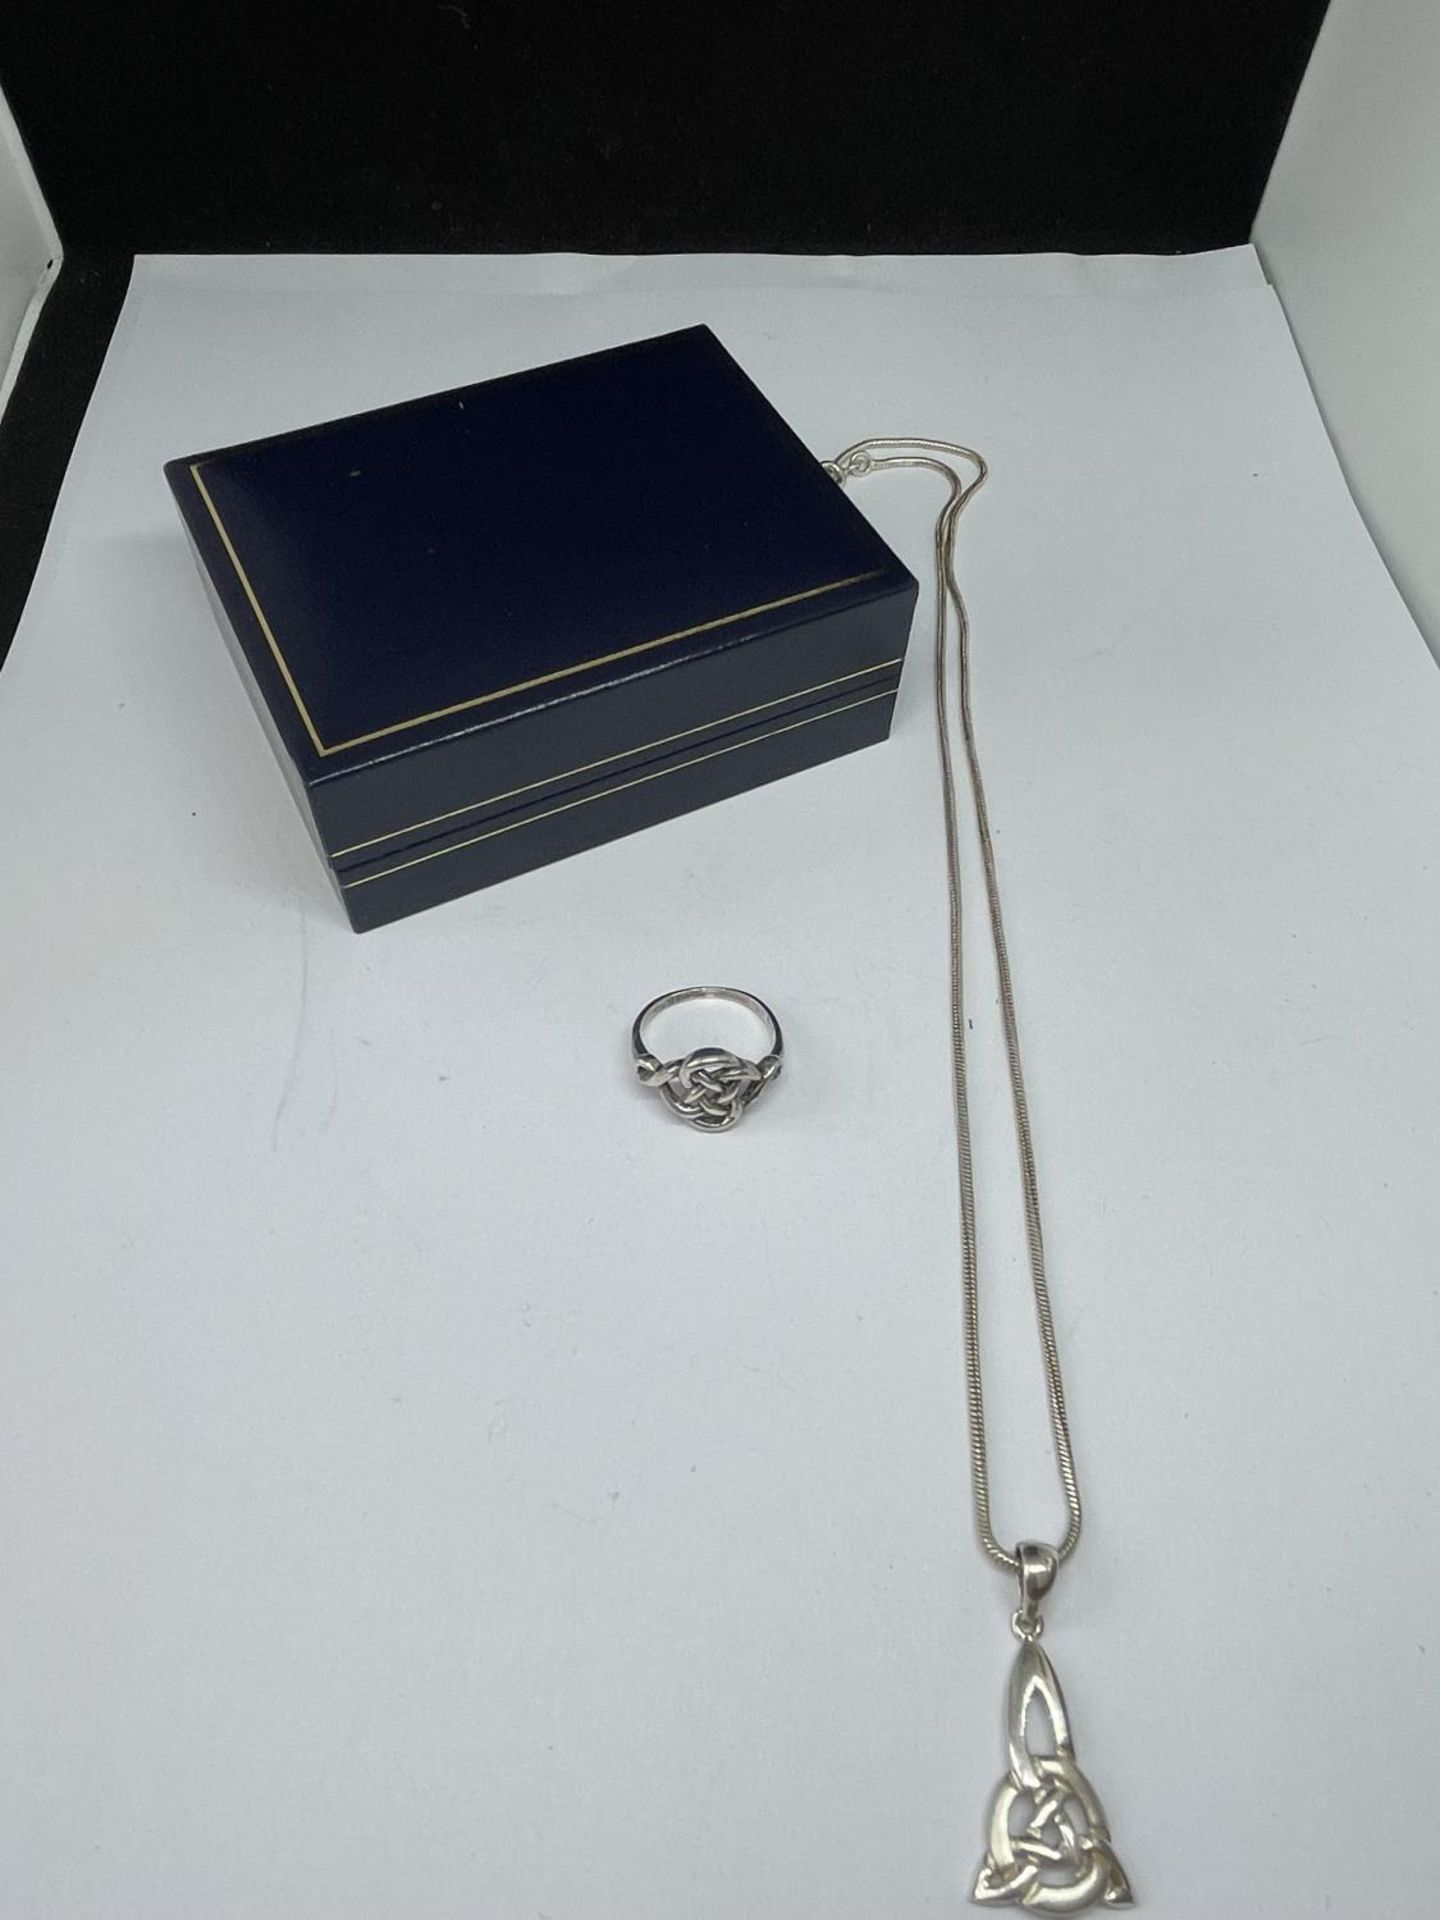 A MARKED SILVER MACKINTOSCH NECKLACE WITH PENDANT AND A RING